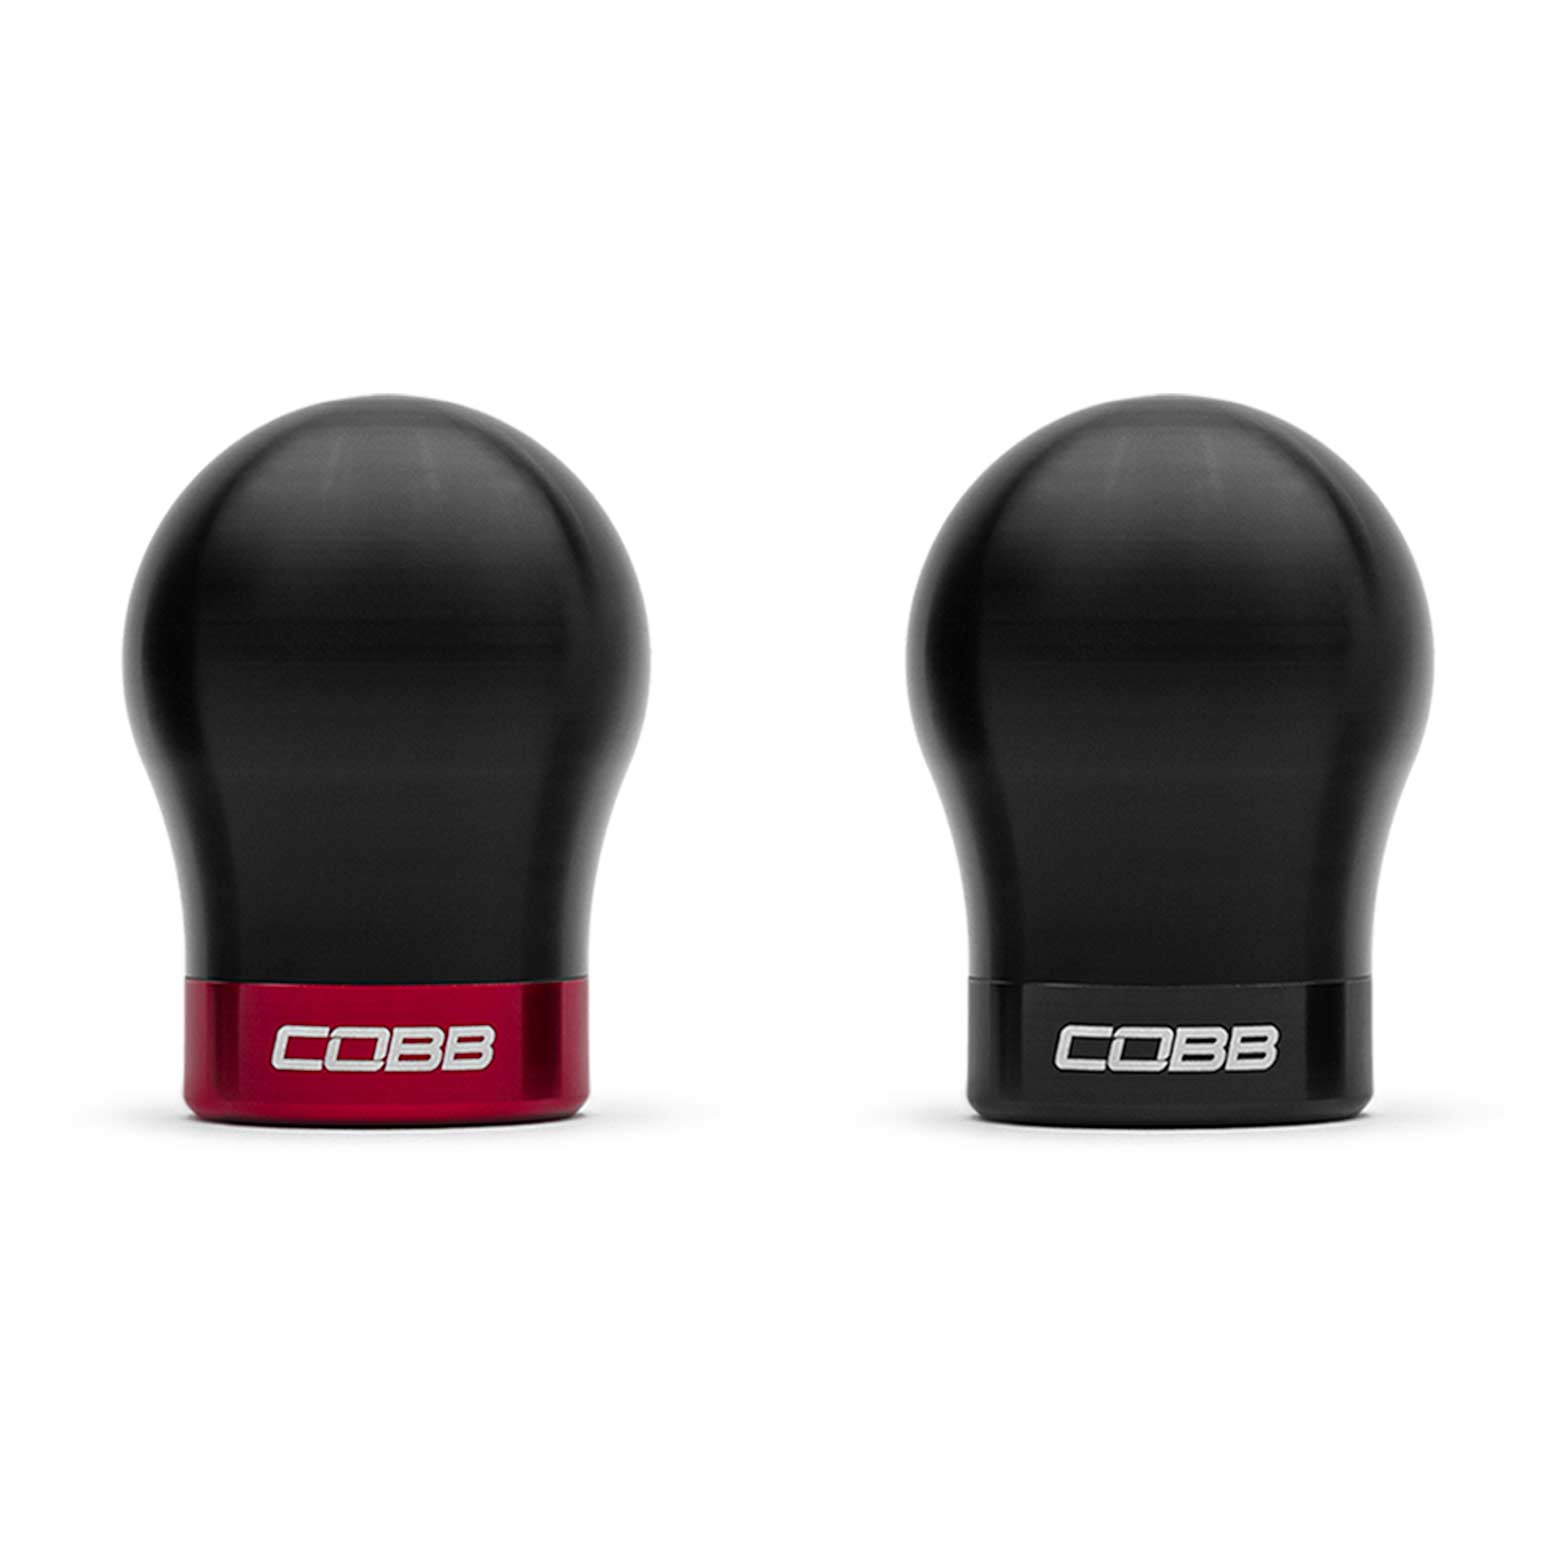 SHORT WEIGHTED COBB KNOB FOR SUBARU BRZ, SCION FR-S, TOYOTA GT-86/GR86, FORD FOCUS ST/RS, FIESTA ST - 0